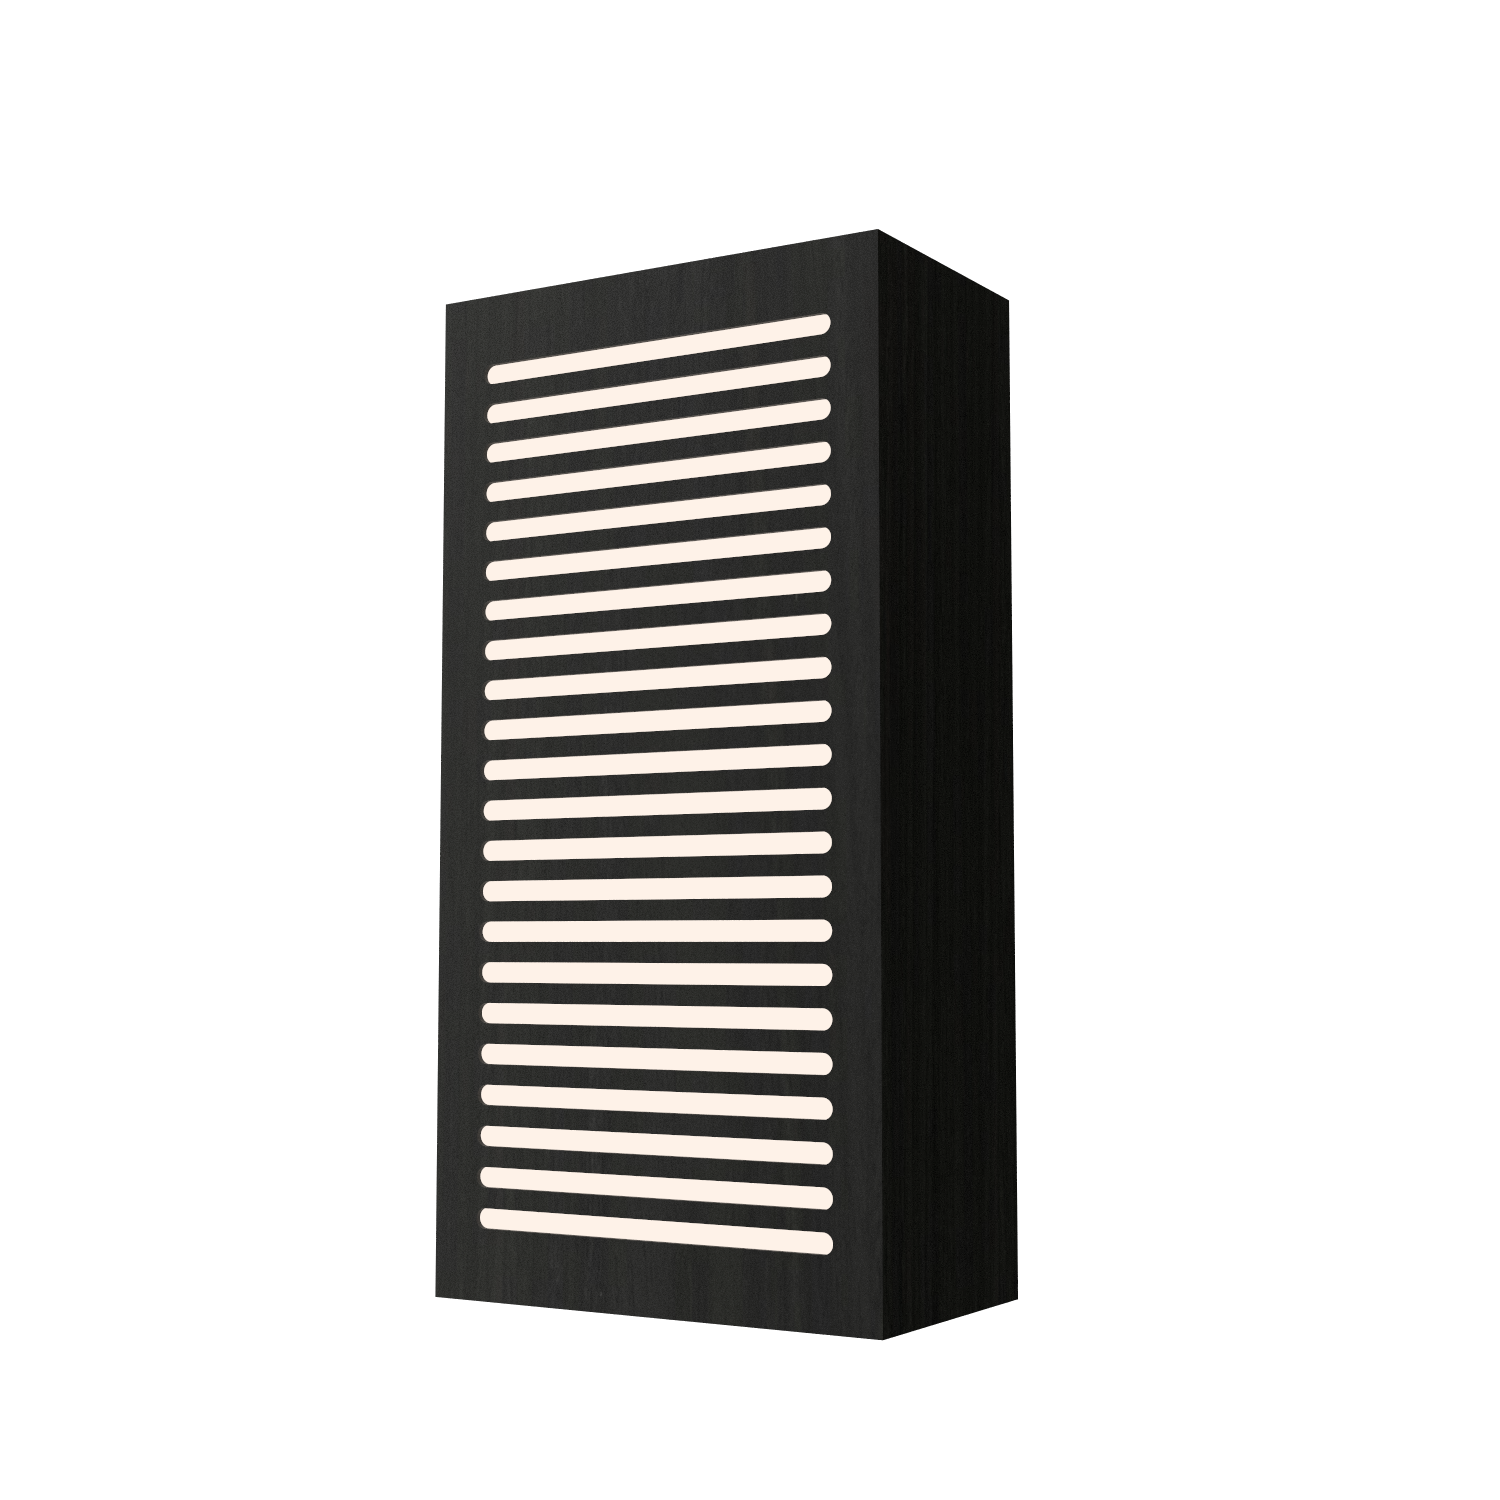 Wall Lamp Accord Clean 580 - Clean Line Accord Lighting | 44. Charcoal